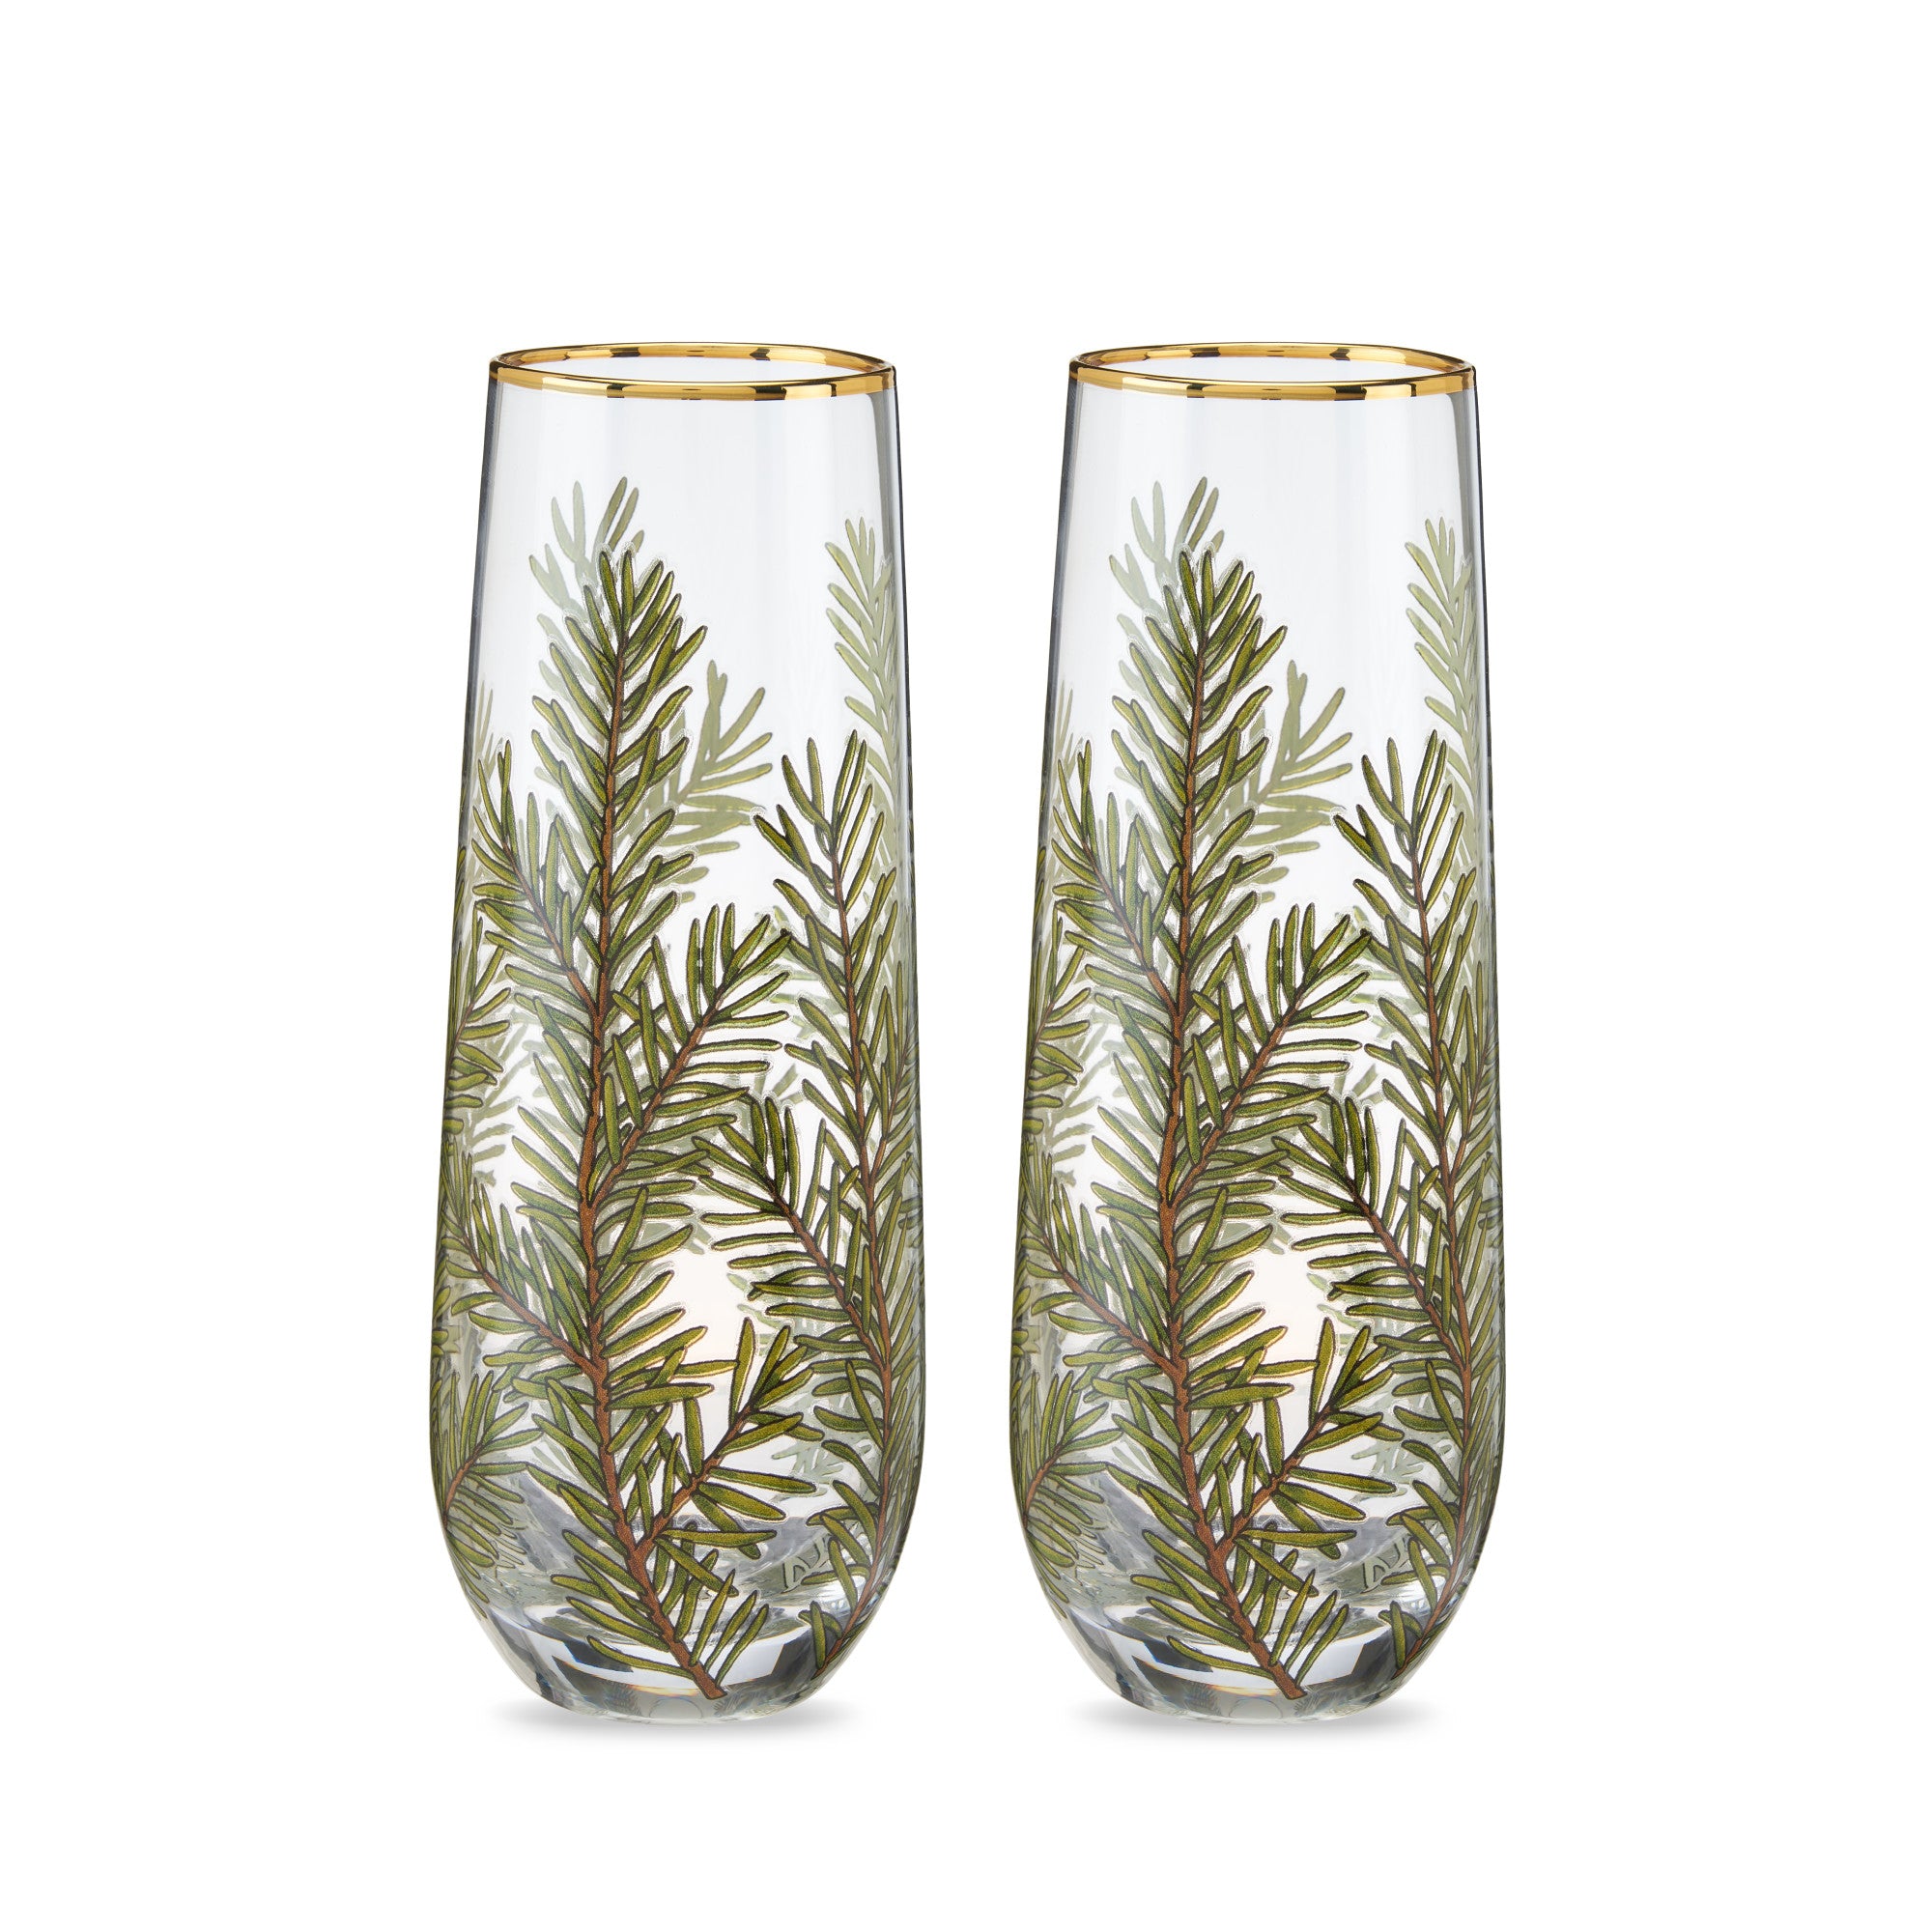 Woodland Stemless Champagne Flute Set by Twine®